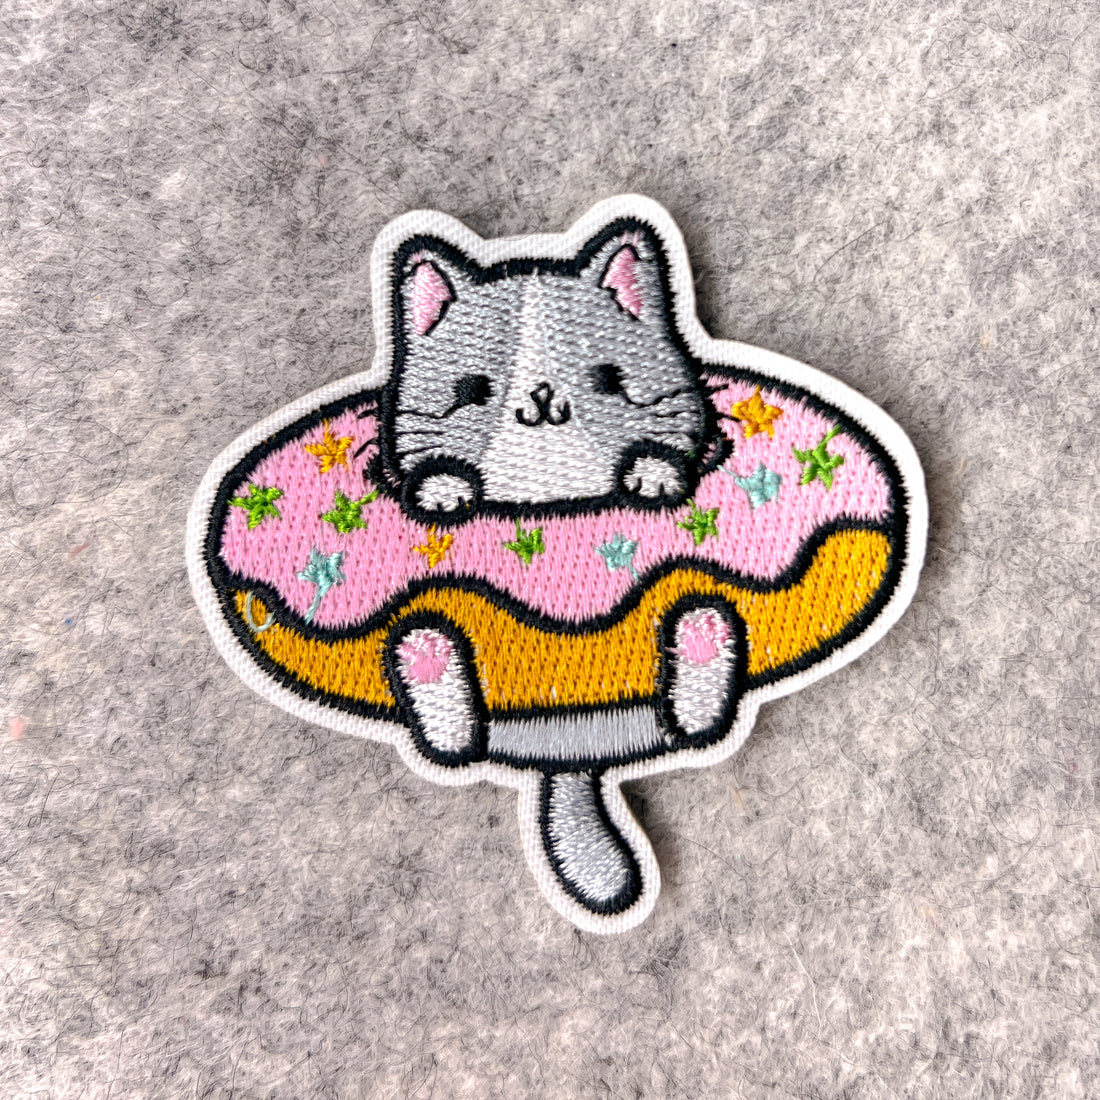 Kawaii / Cute Patches – Shirts Patches And More